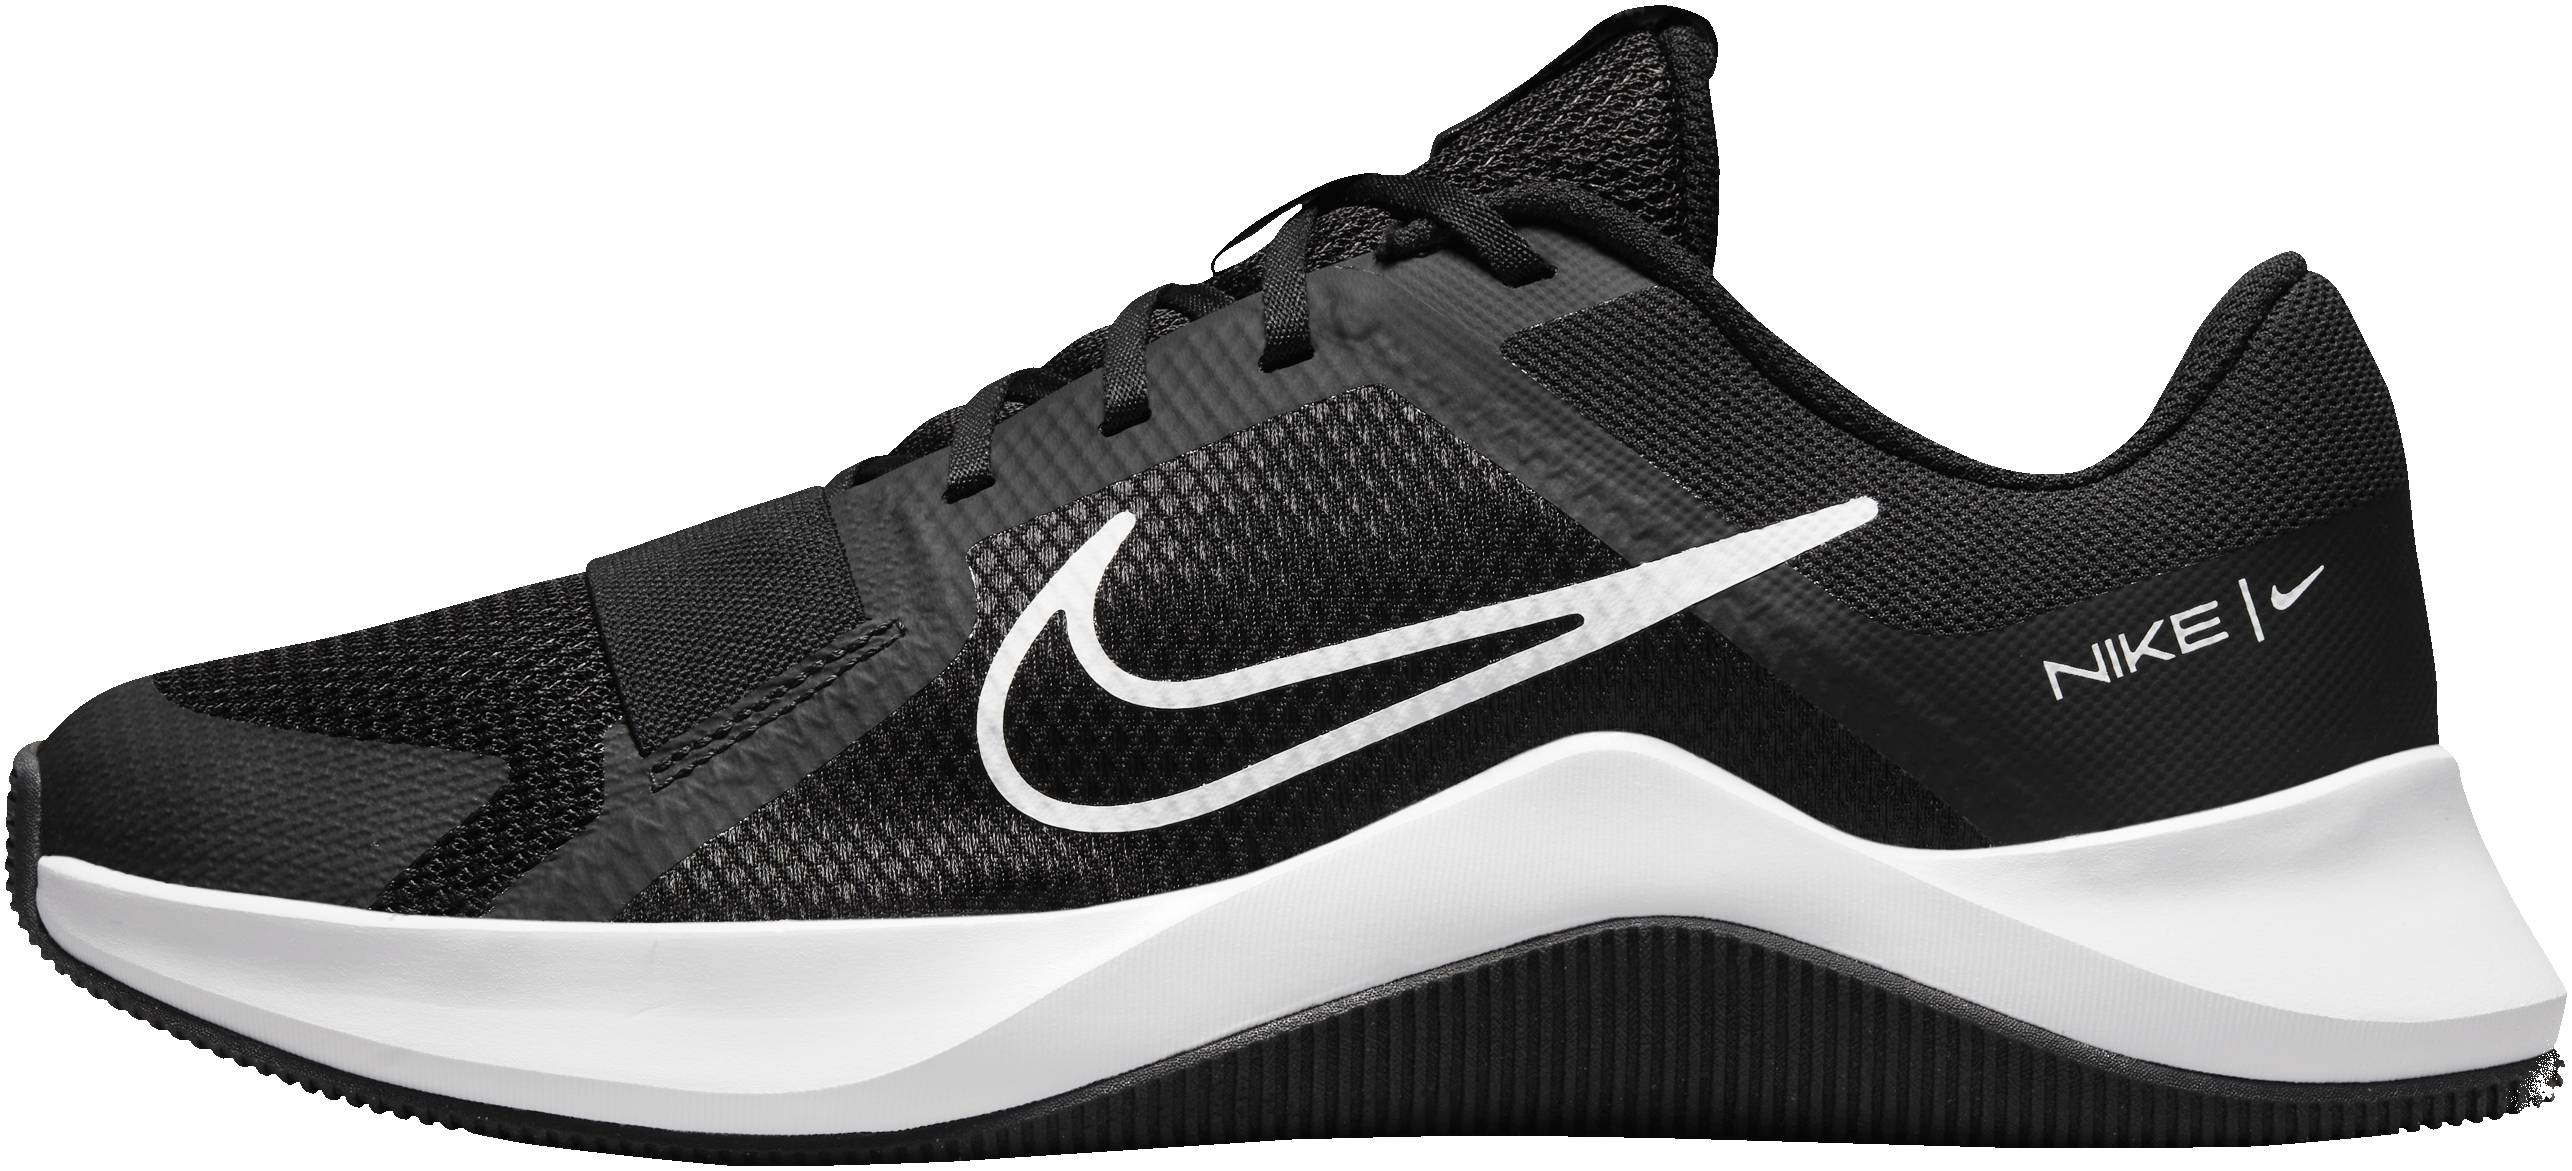 Nike nike mc training shoes MC Trainer 2 Review 2022, Facts, Deals ($55) | RunRepeat